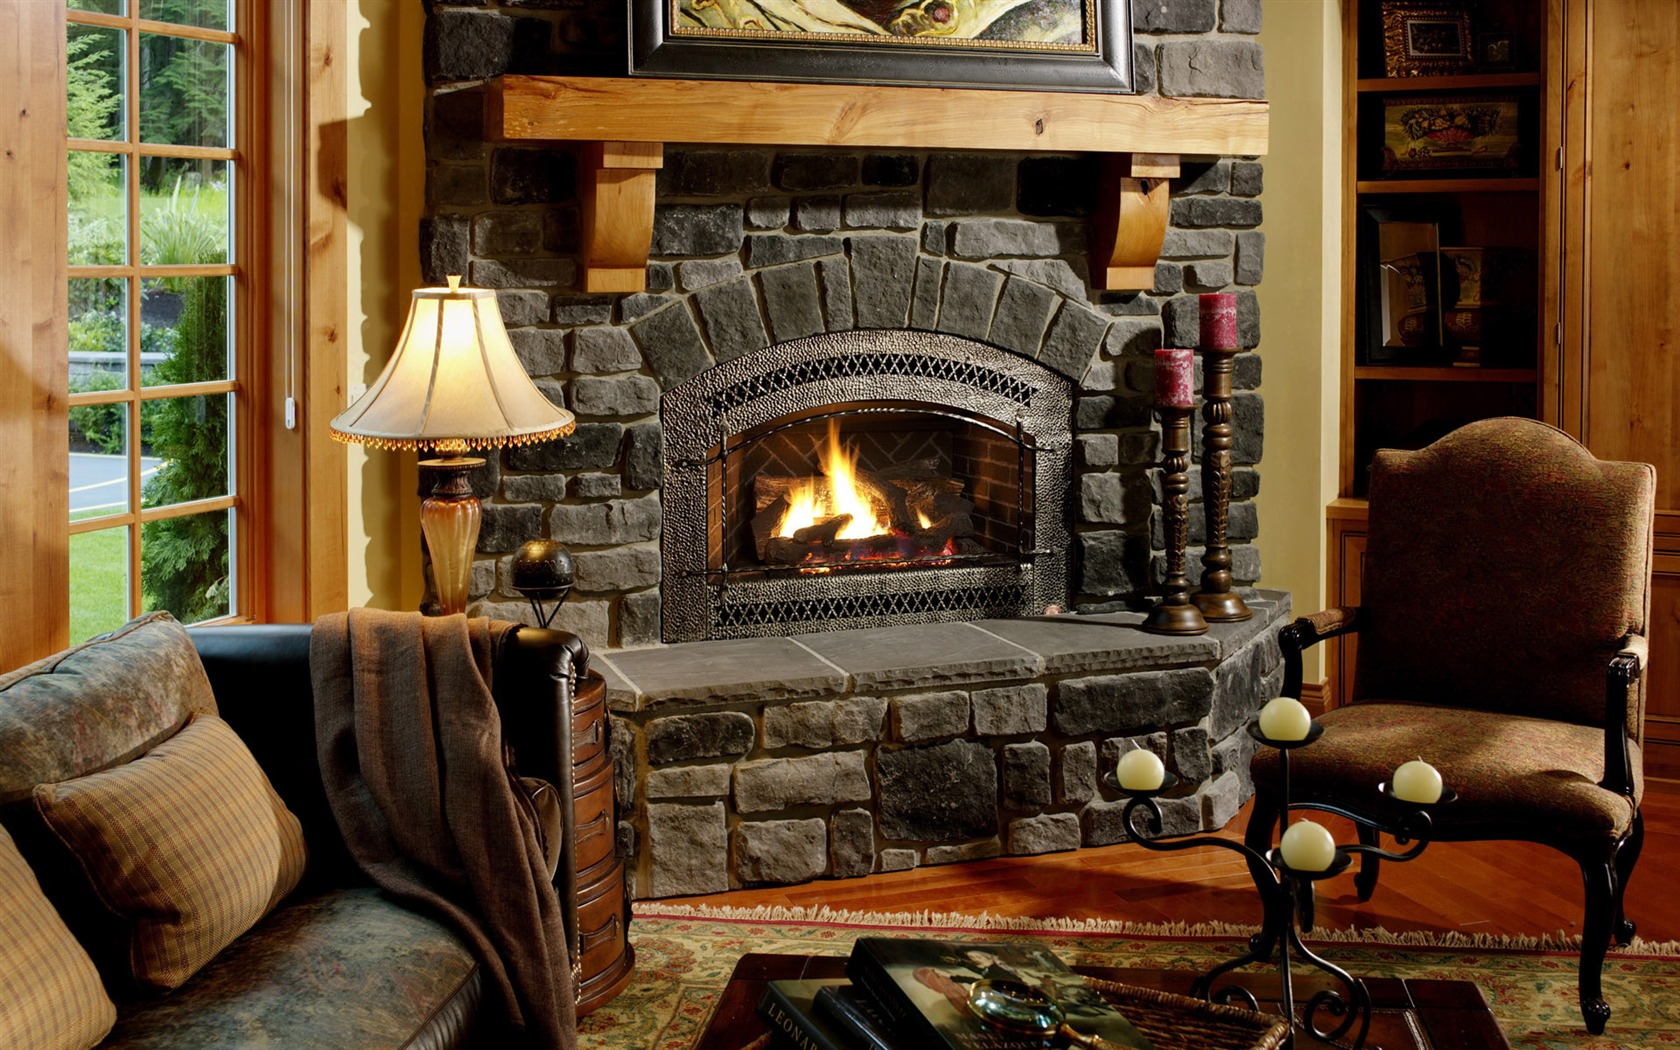 Western-style family fireplace wallpaper (1) #19 - 1680x1050